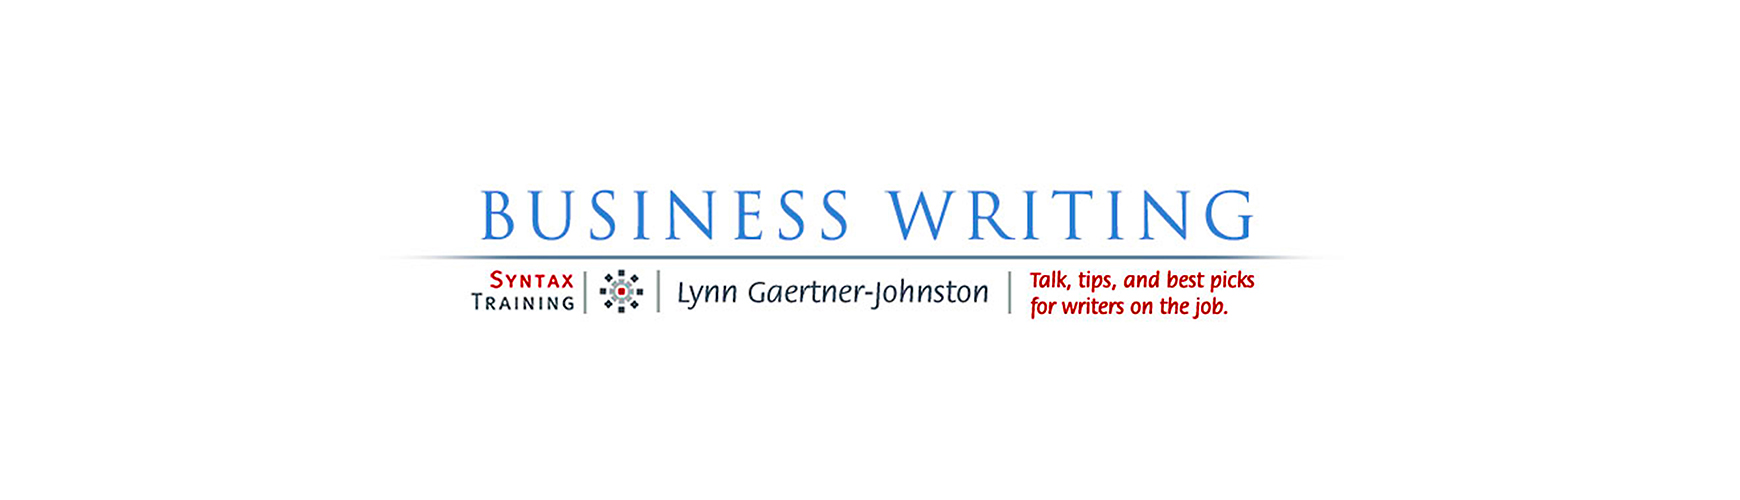 business writing course seattle